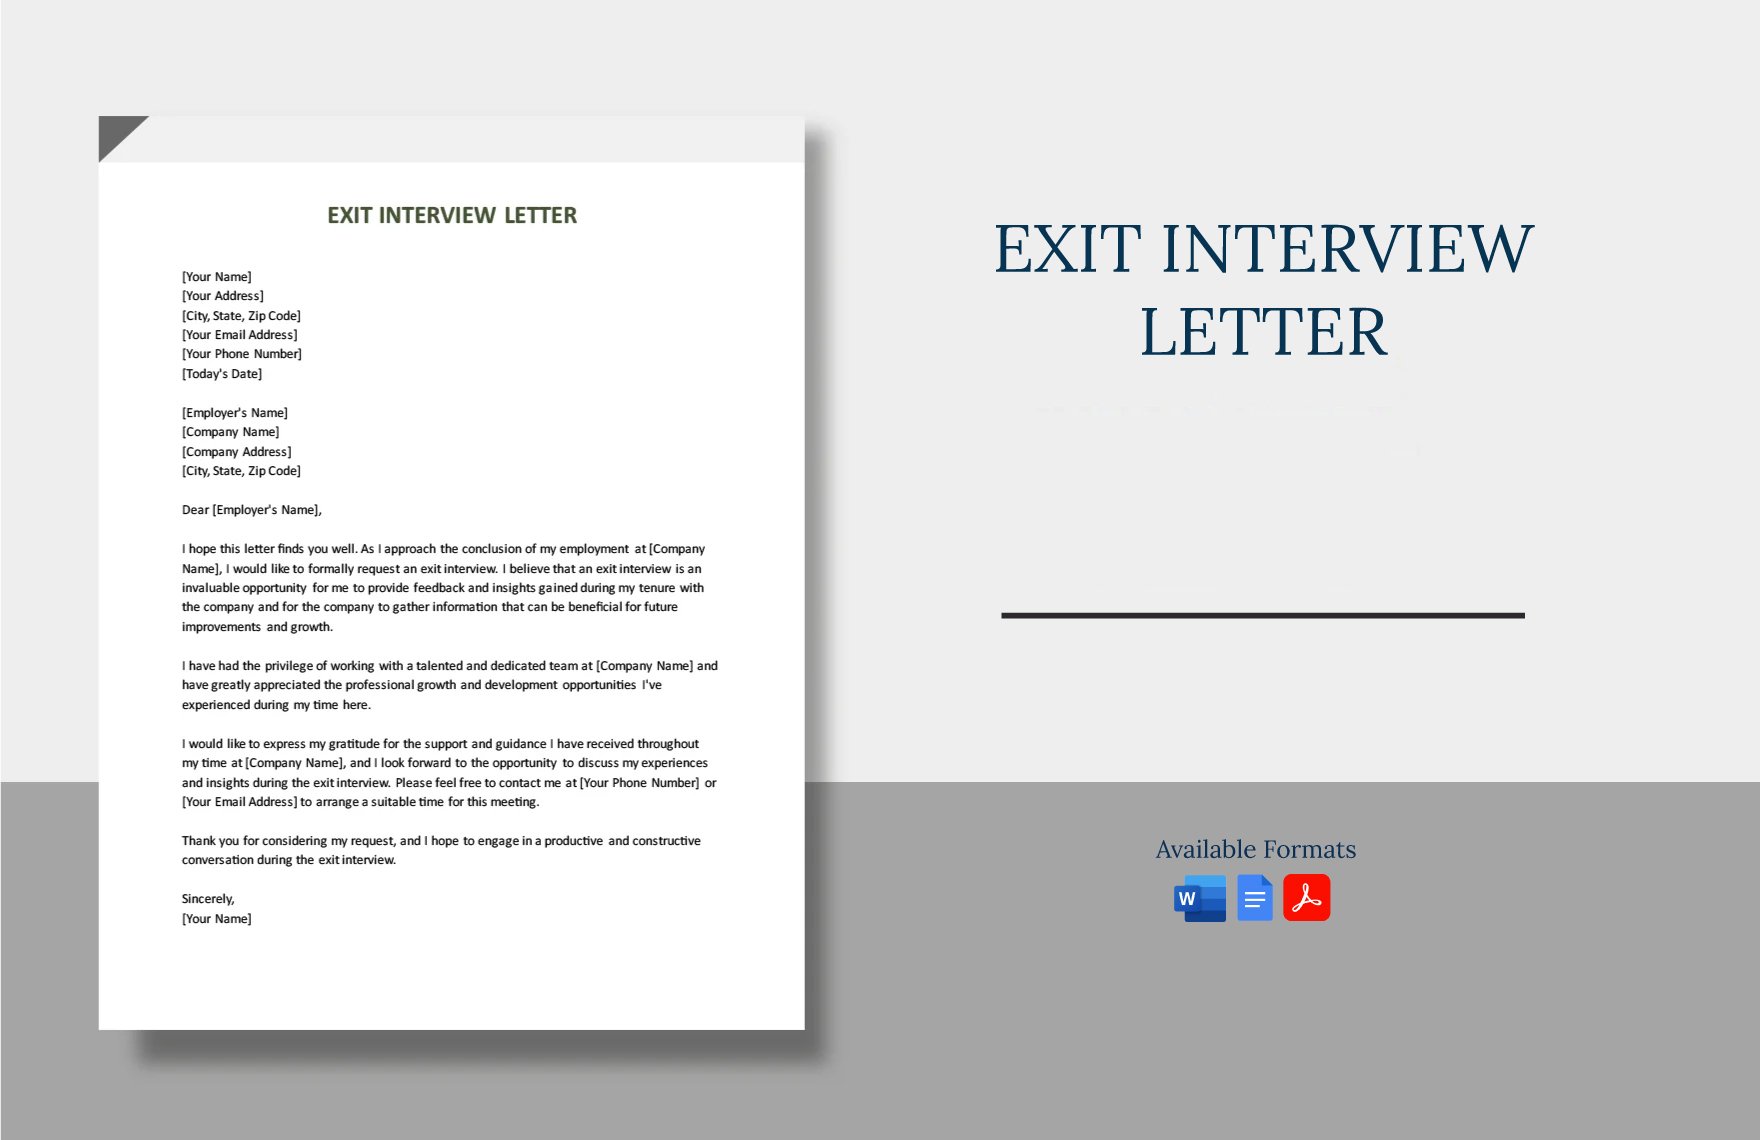 Exit Interview Letter in Word, Google Docs, PDF